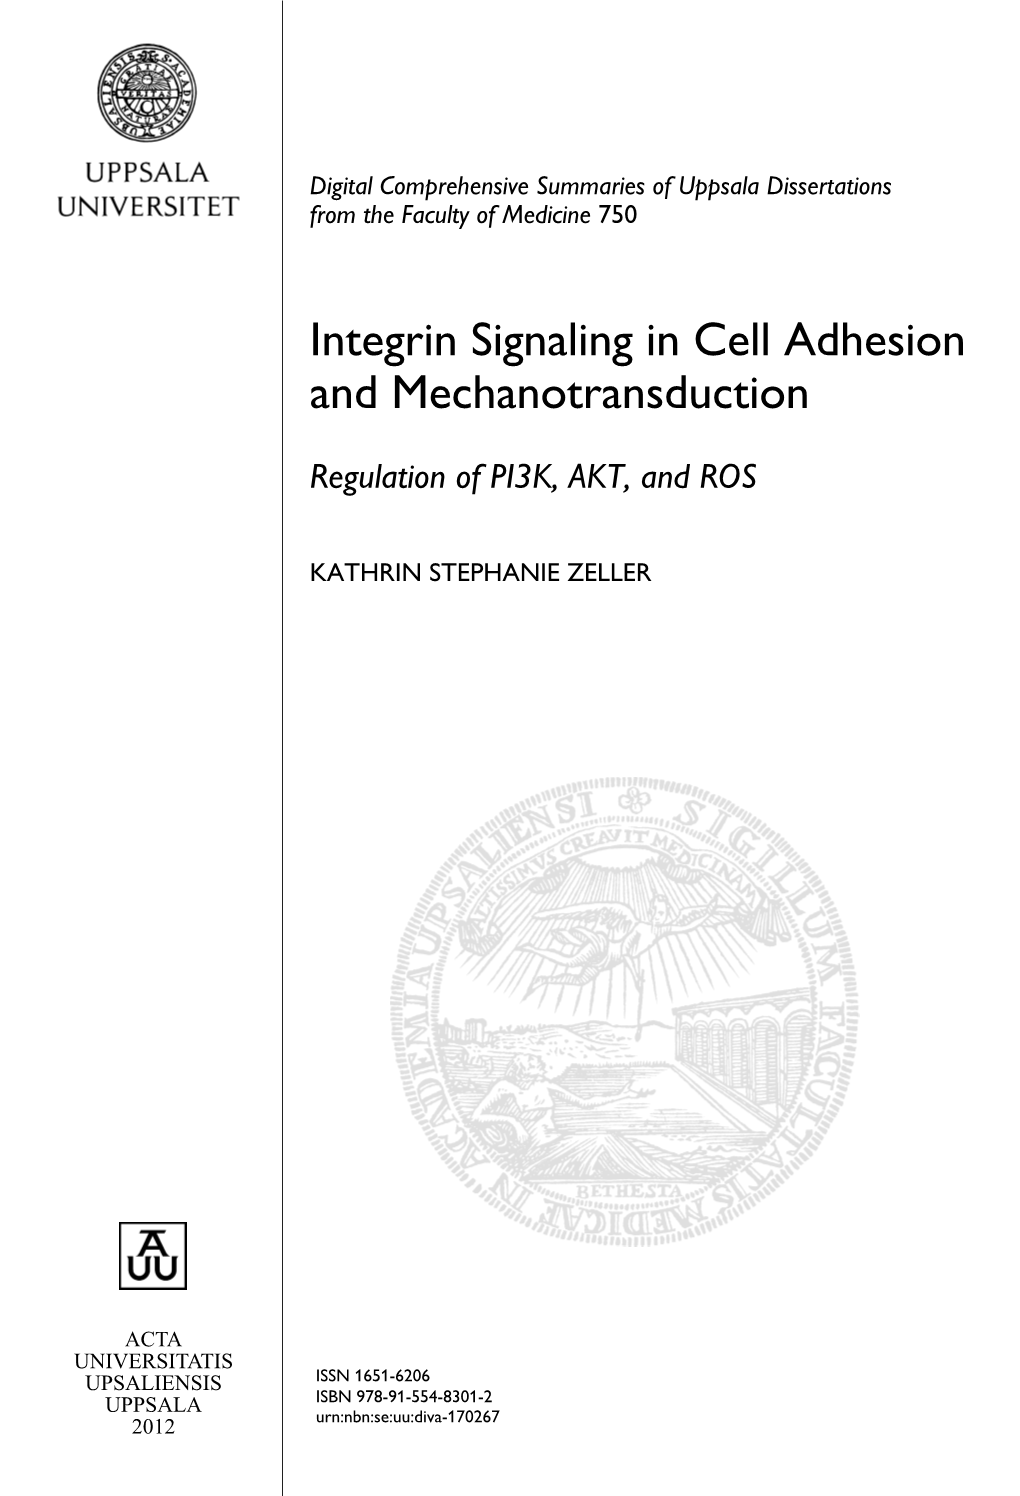 Integrin Signaling in Cell Adhesion and Mechanotransduction: Regulation of PI3K, AKT, And